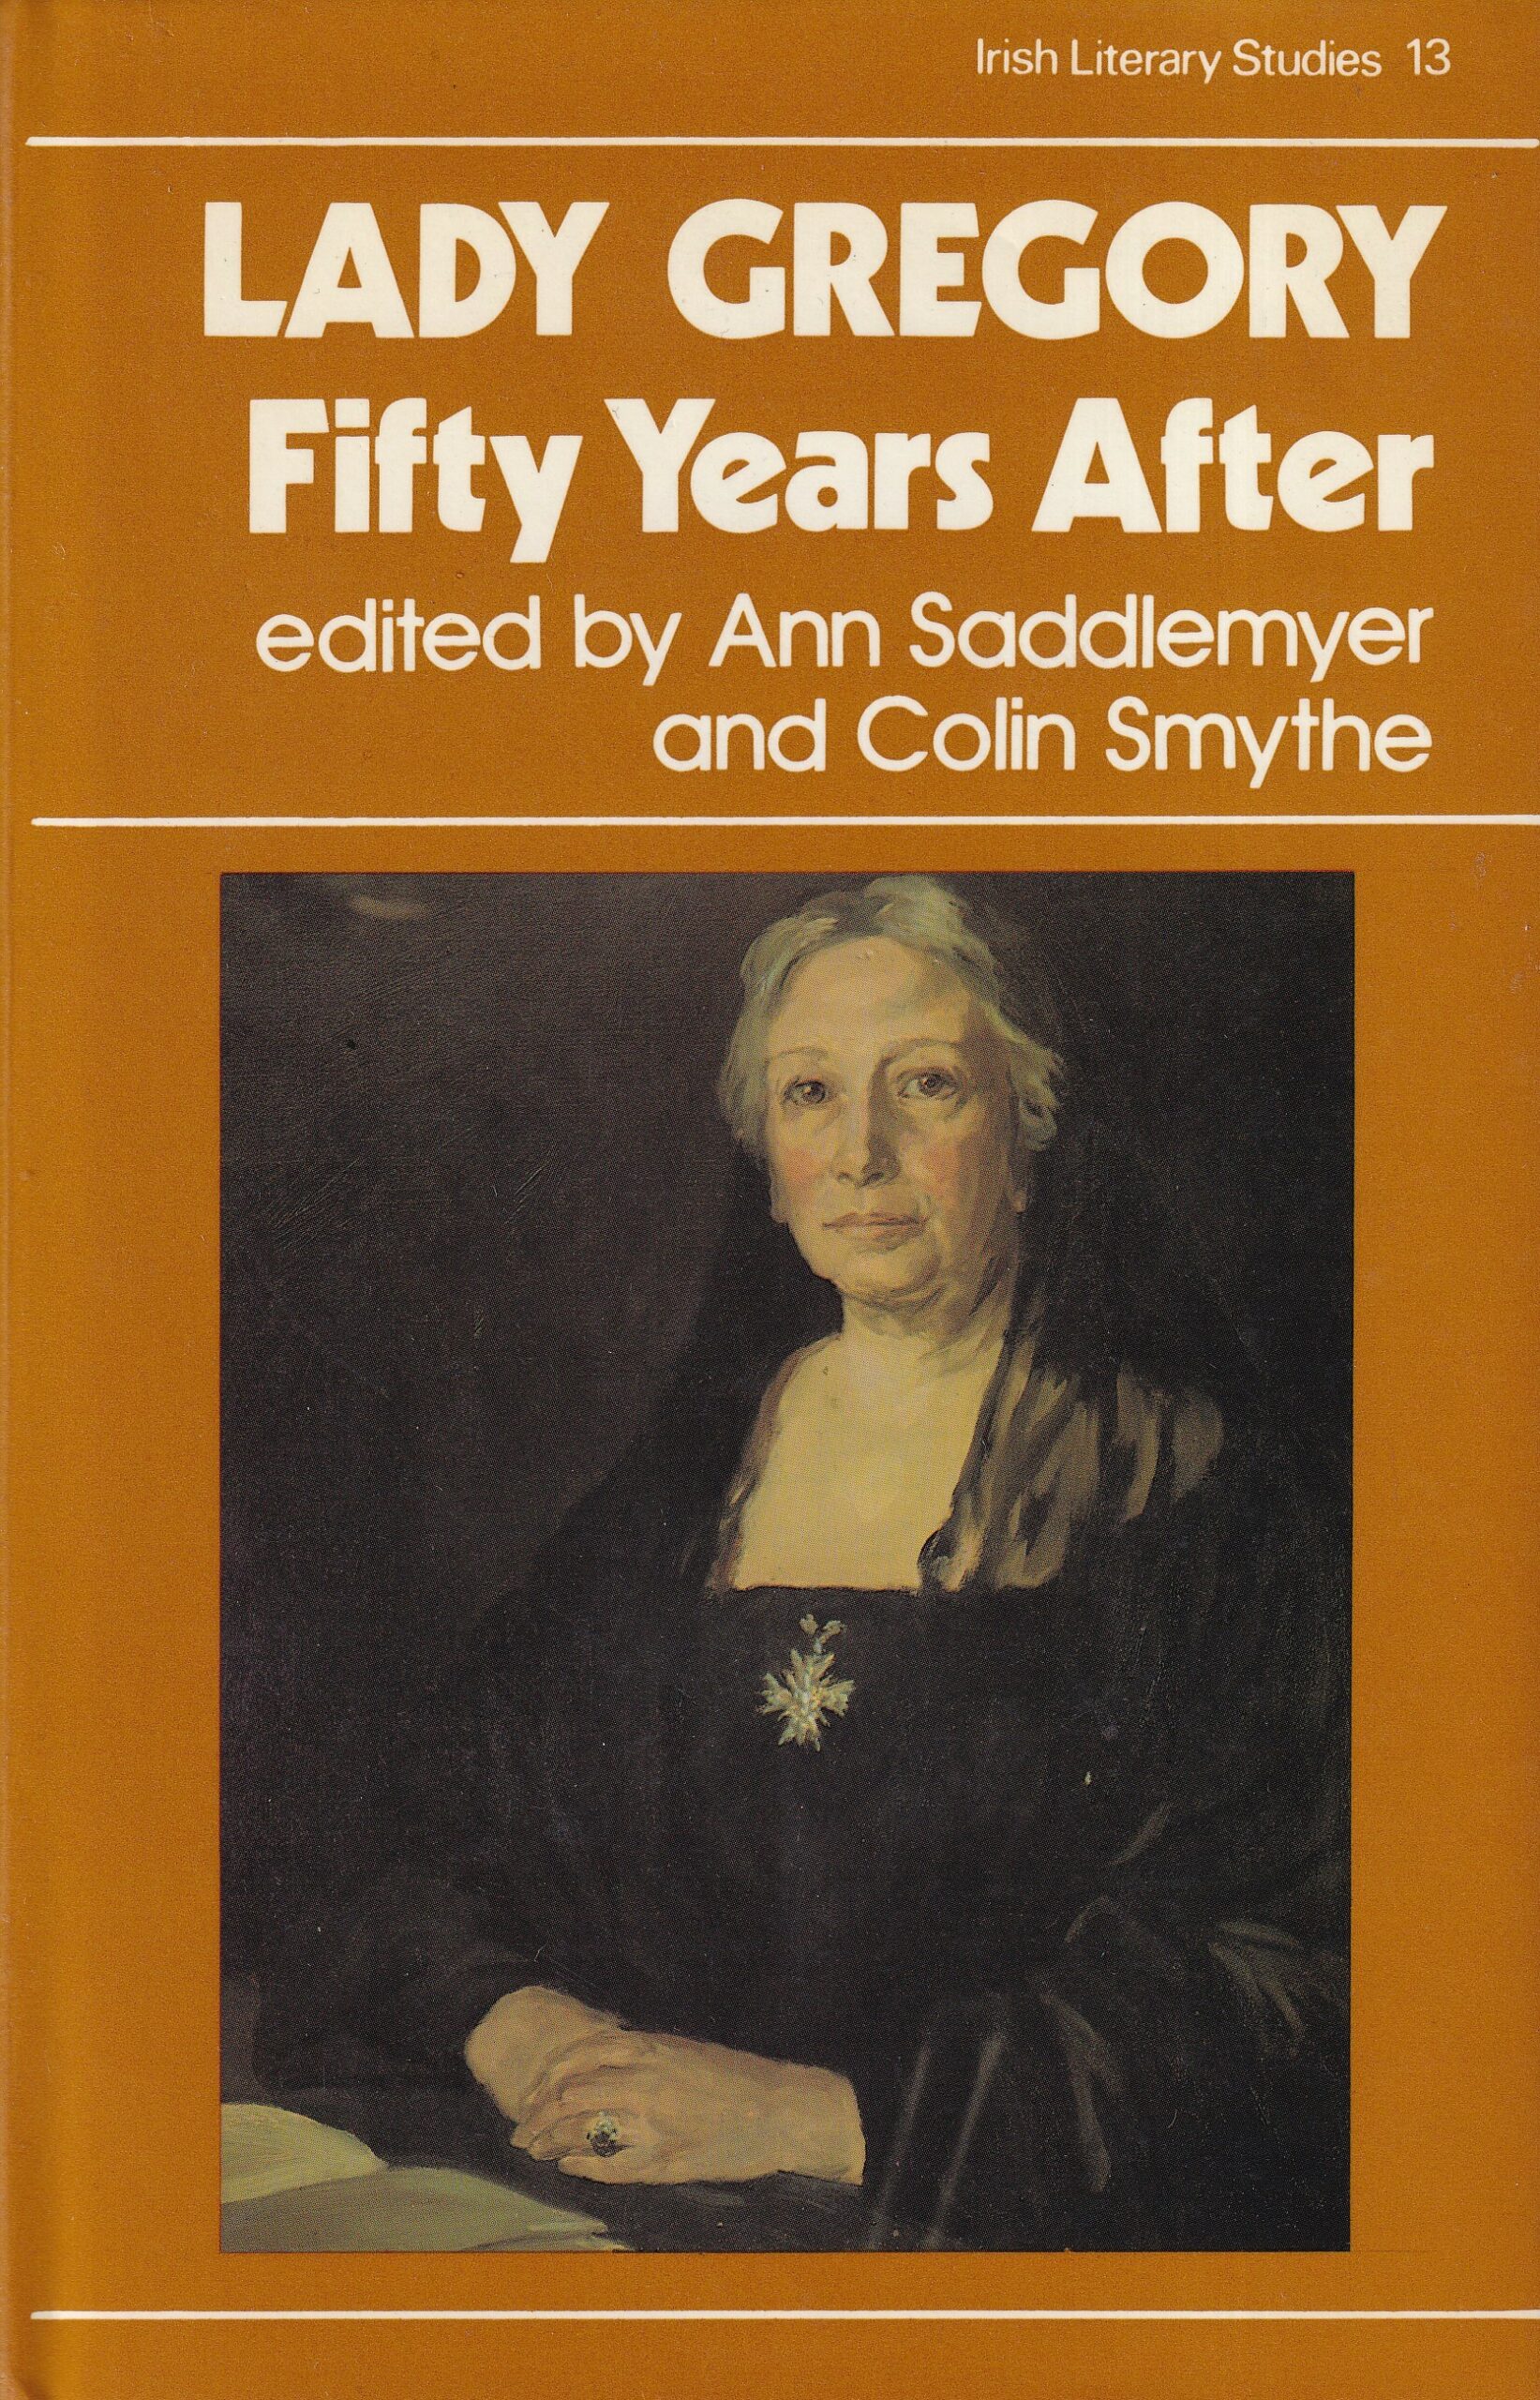 Lady Gregory Fifty Years After by Ann Saddlemyer and Colin Smythe (eds.)